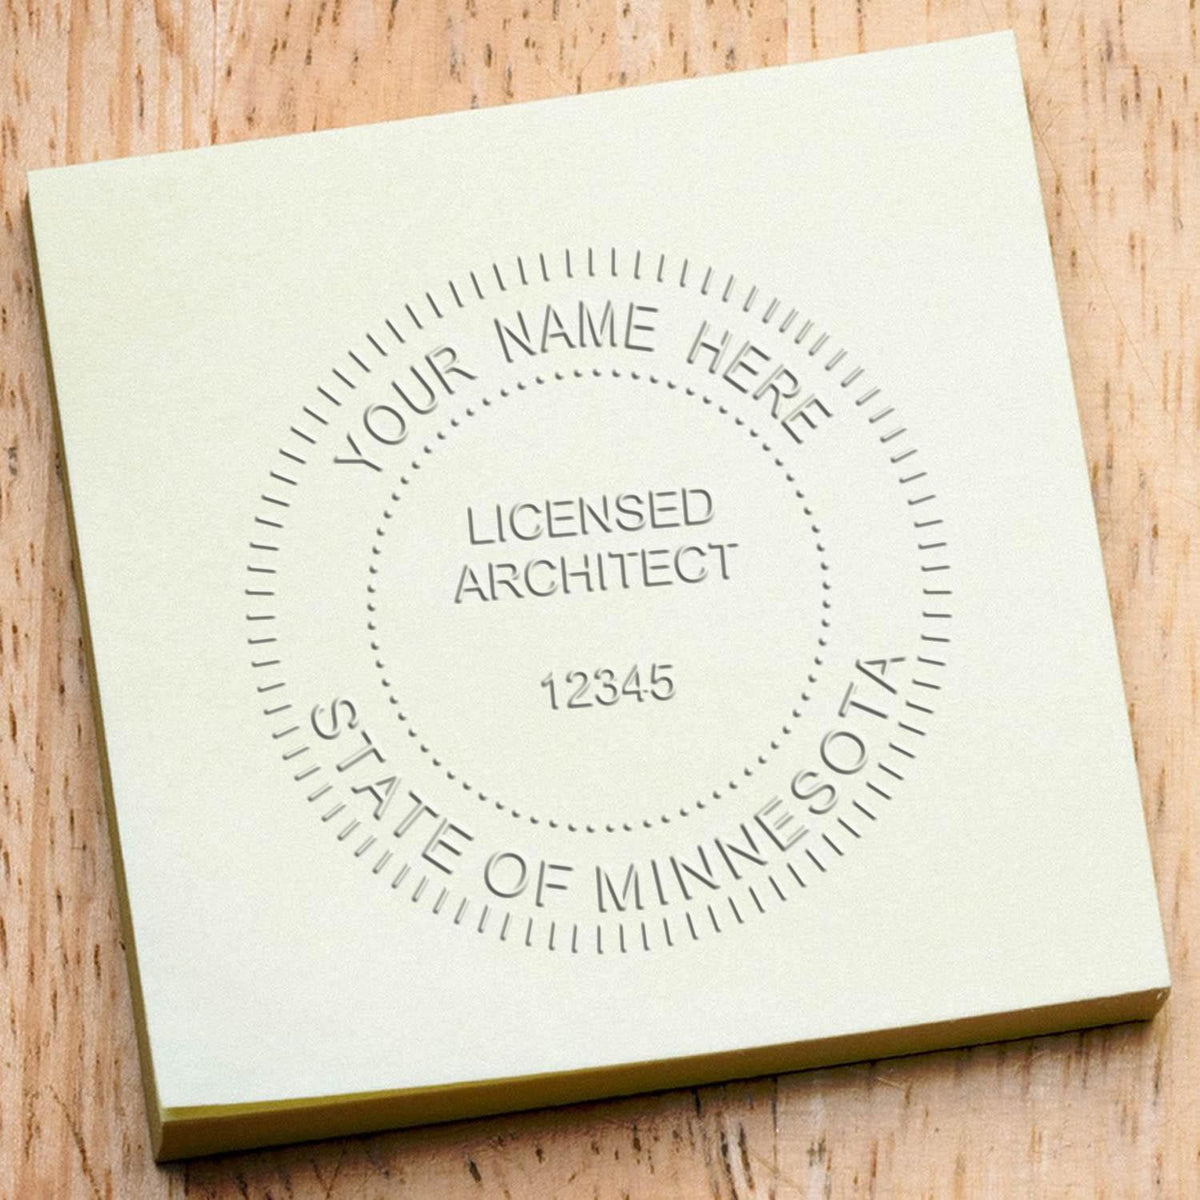 A photograph of the Hybrid Minnesota Architect Seal stamp impression reveals a vivid, professional image of the on paper.